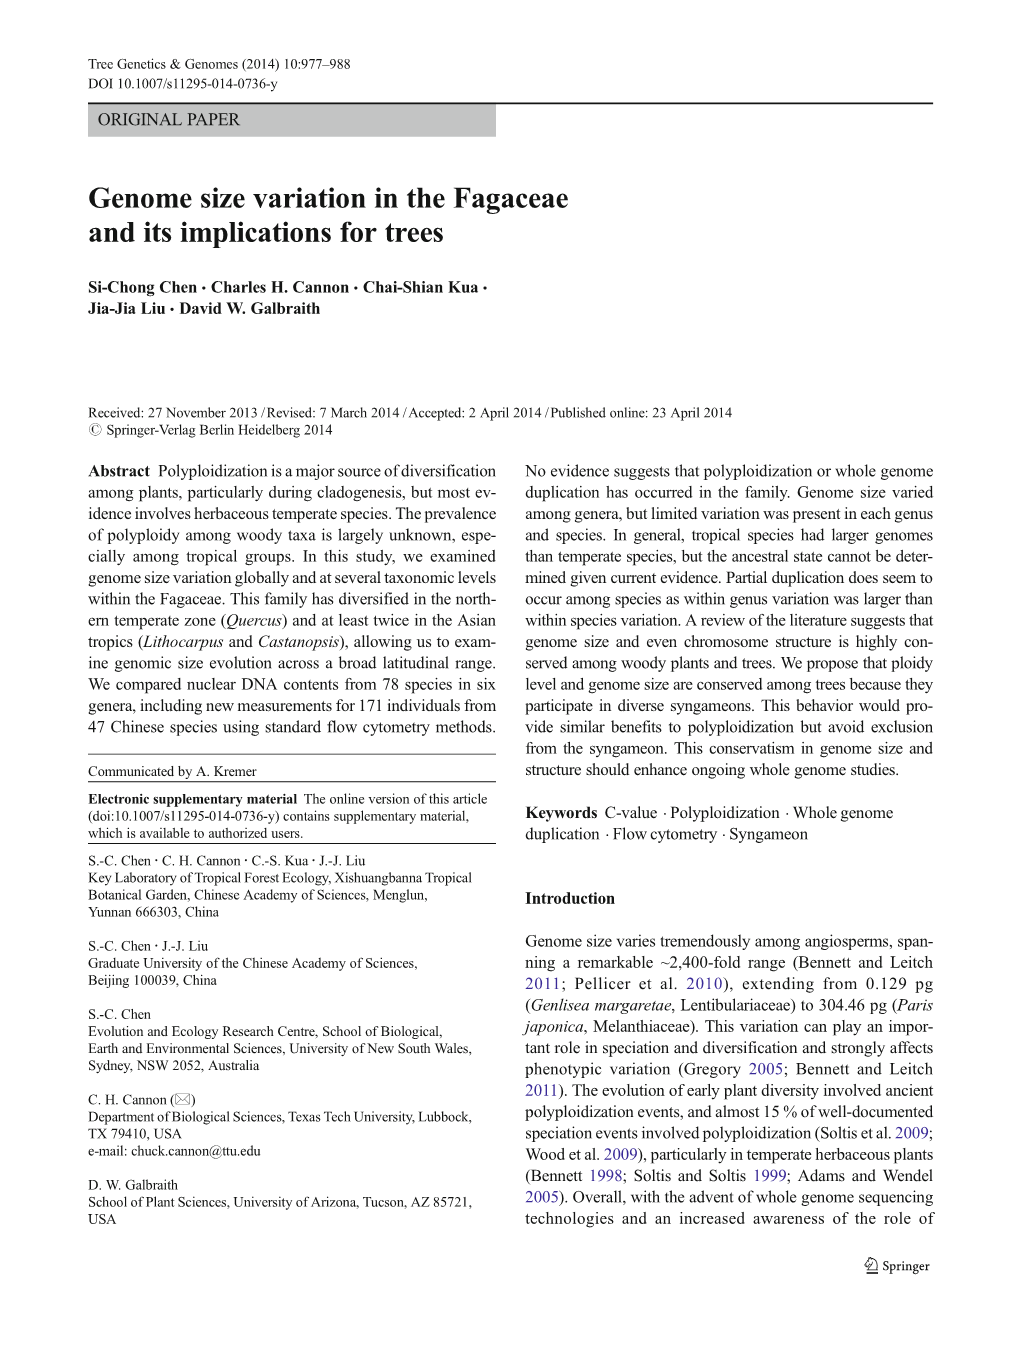 Genome Size Variation in the Fagaceae and Its Implications for Trees